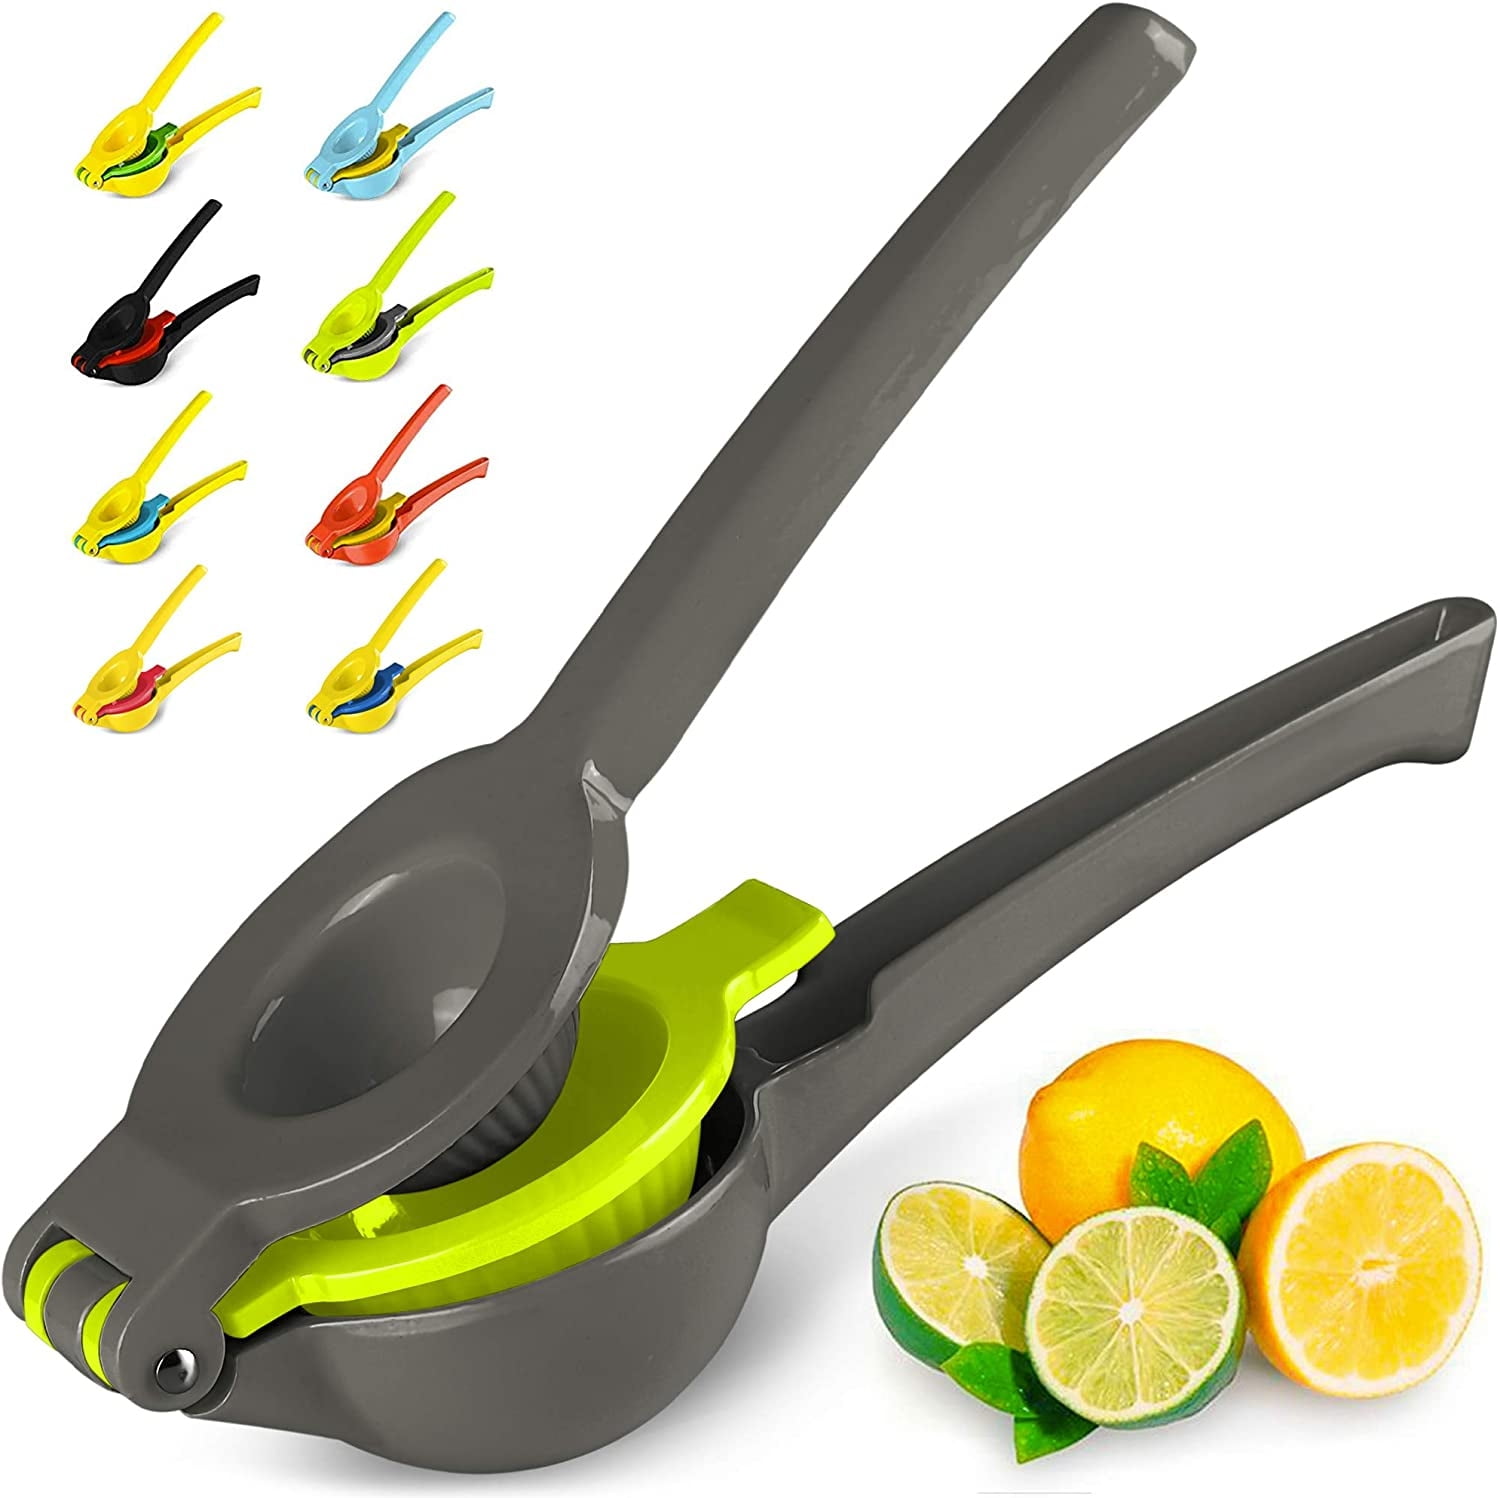 Zulay Metal 2-In-1 Lemon Lime Squeezer - Hand Juicer Lemon Squeezer Gets  Every Last Drop with Cheese Slicer With Adjustable Thickness - Yahoo  Shopping